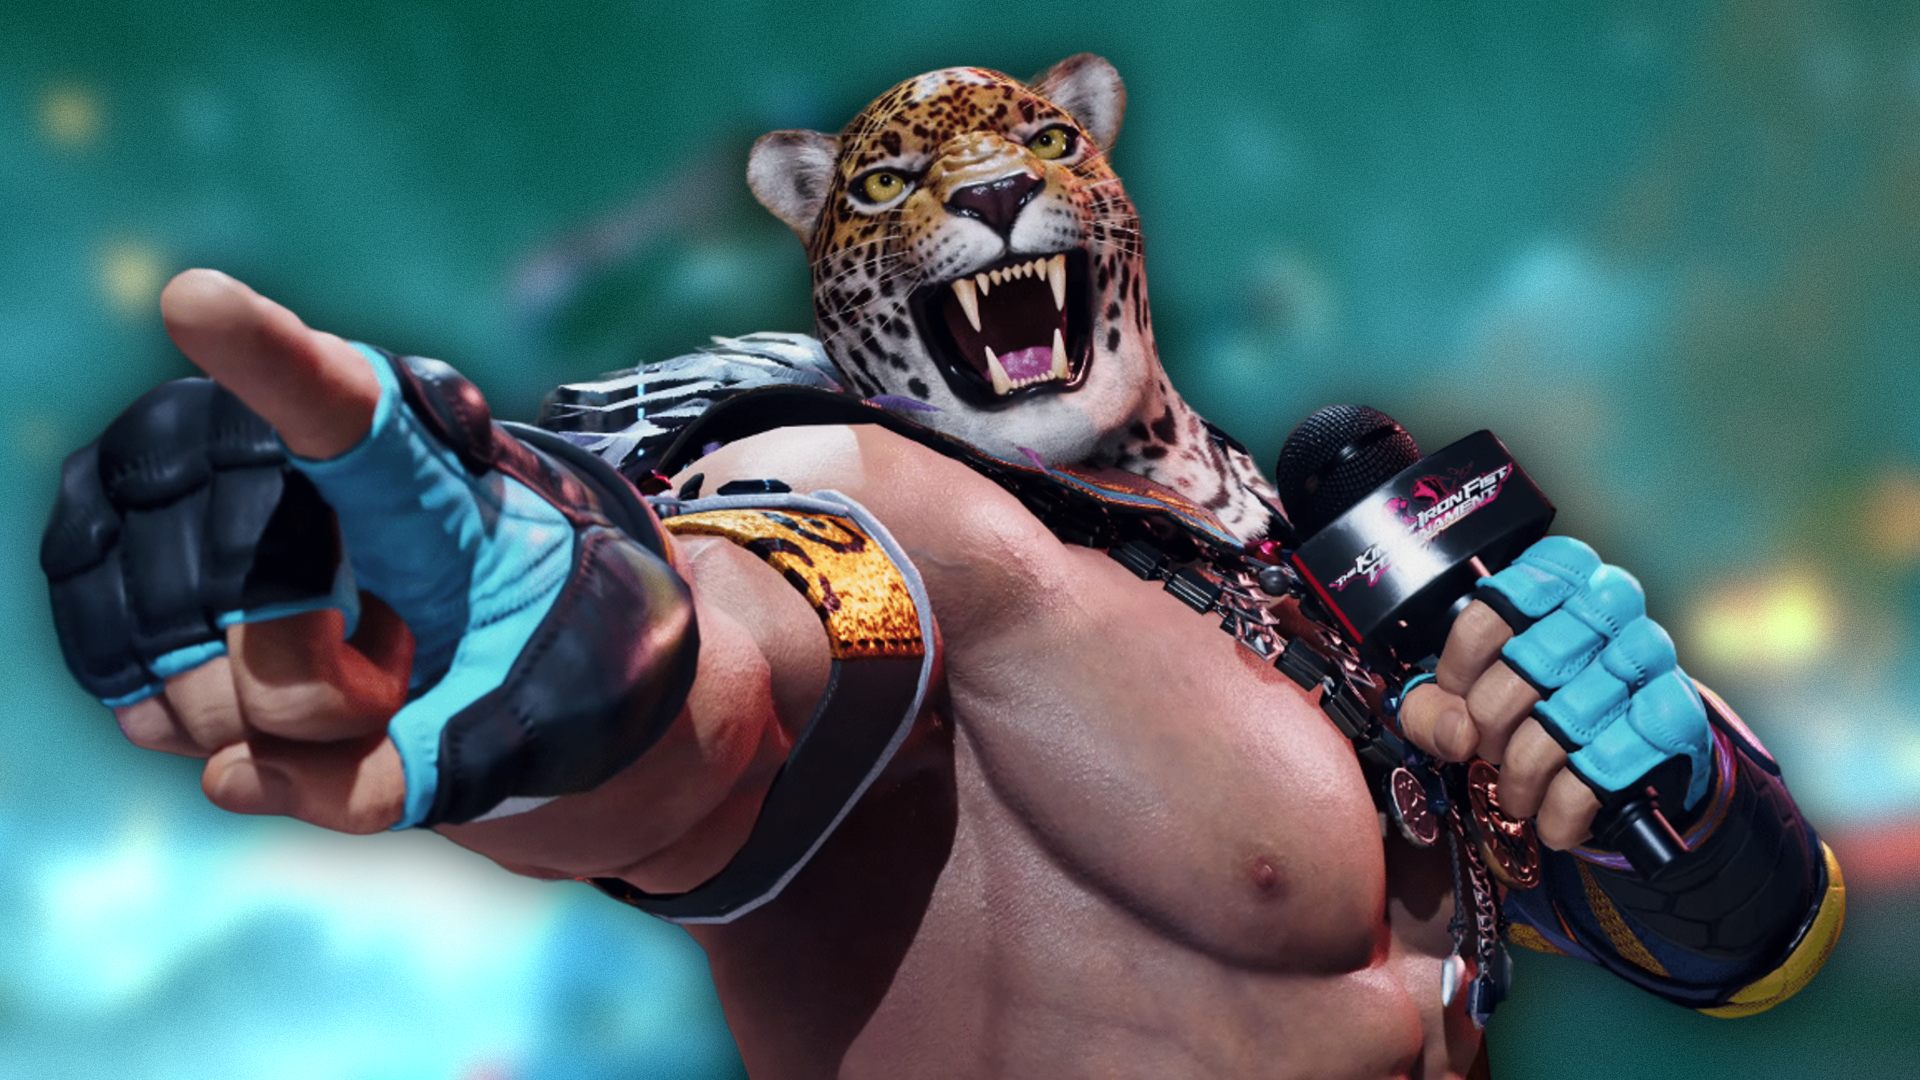 Tekken 7's Season 4 could still have some more classic characters return,  but which of the ones still missing seem to have the best shot?